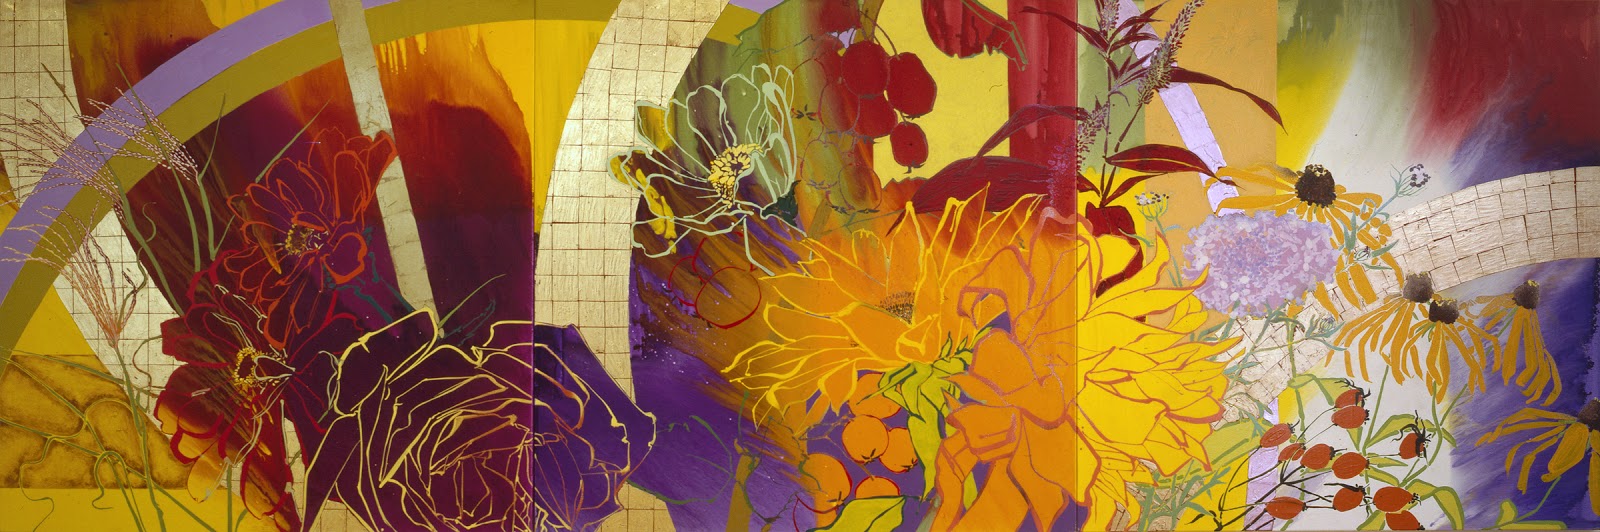 Robert Kushner, “Indian Summer – Homage to Bonnard” (2000), oil, acrylic, and mixed media on canvas, 6 x 18 feet, from “Flora: A Celebration of Flowers in Contemporary Art”